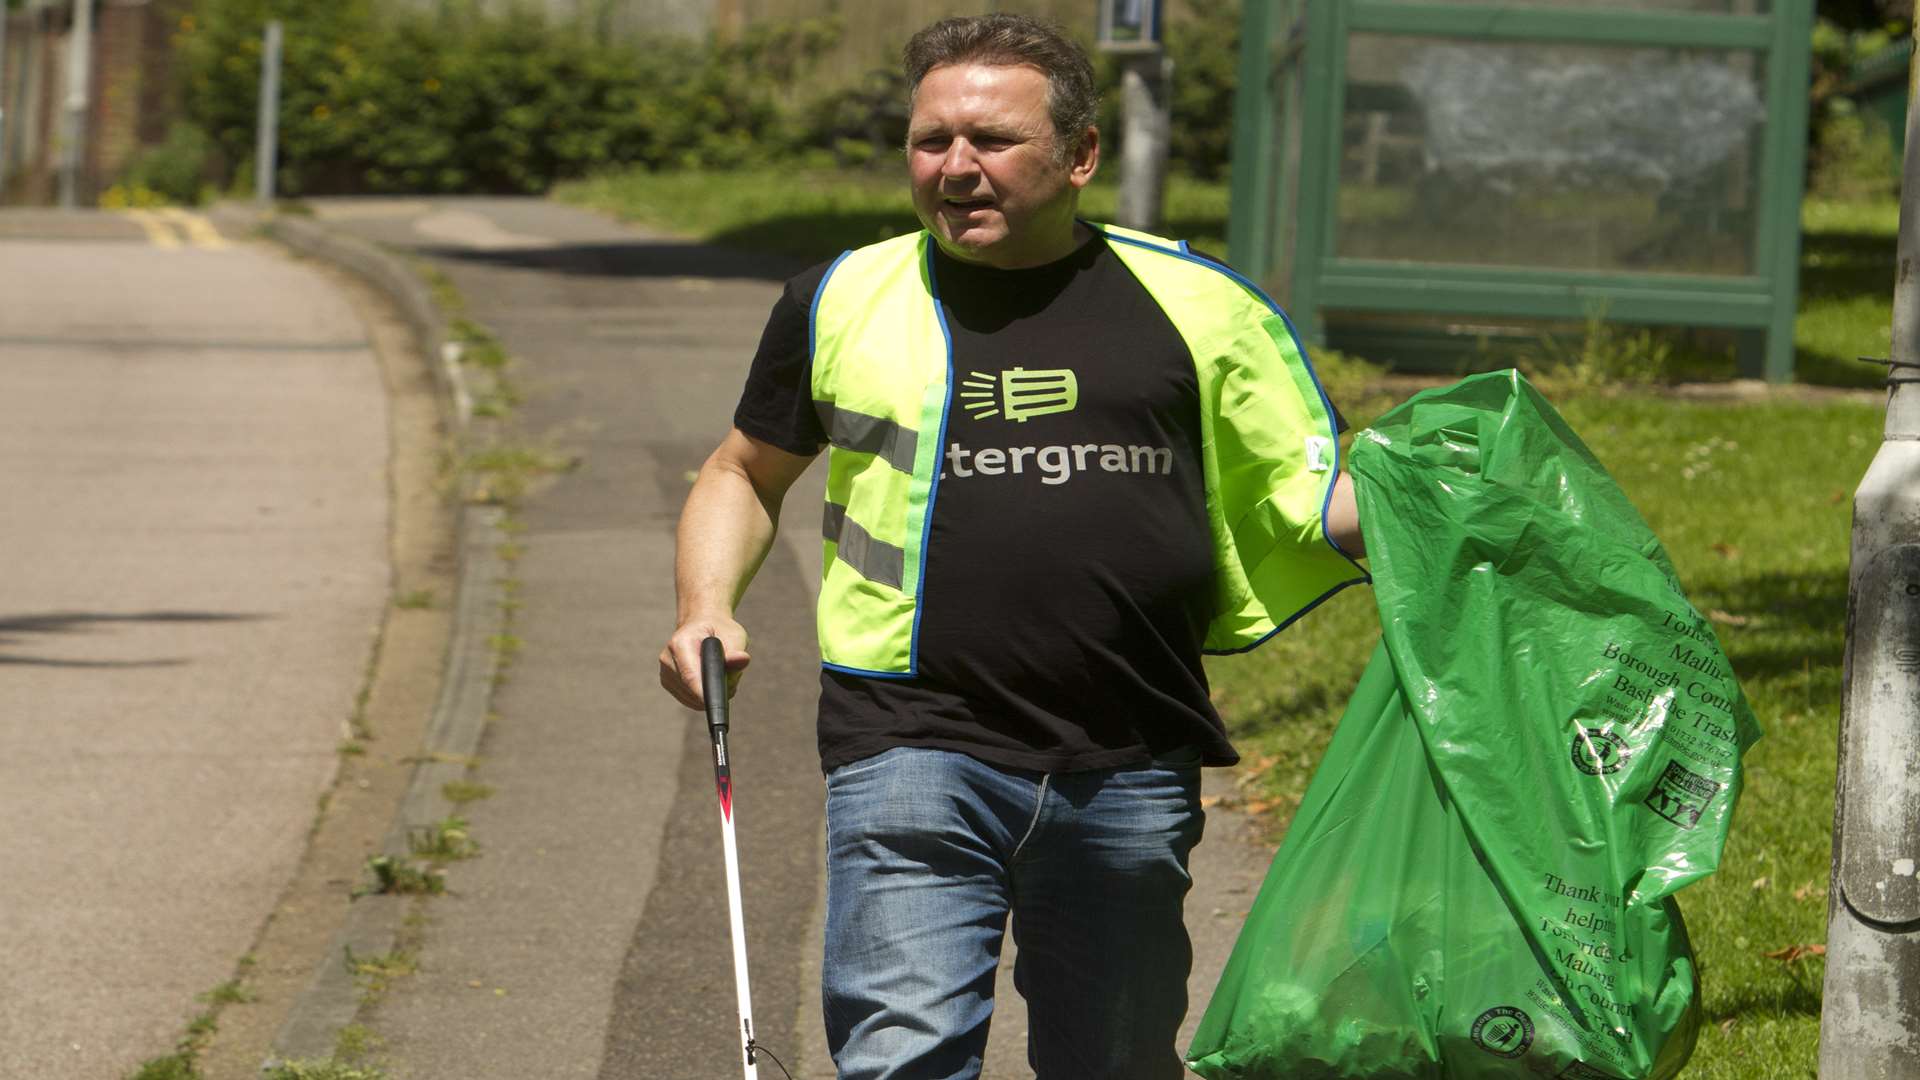 LitterGram founder Danny Lucas on a clean up at Clare Park, East Malling